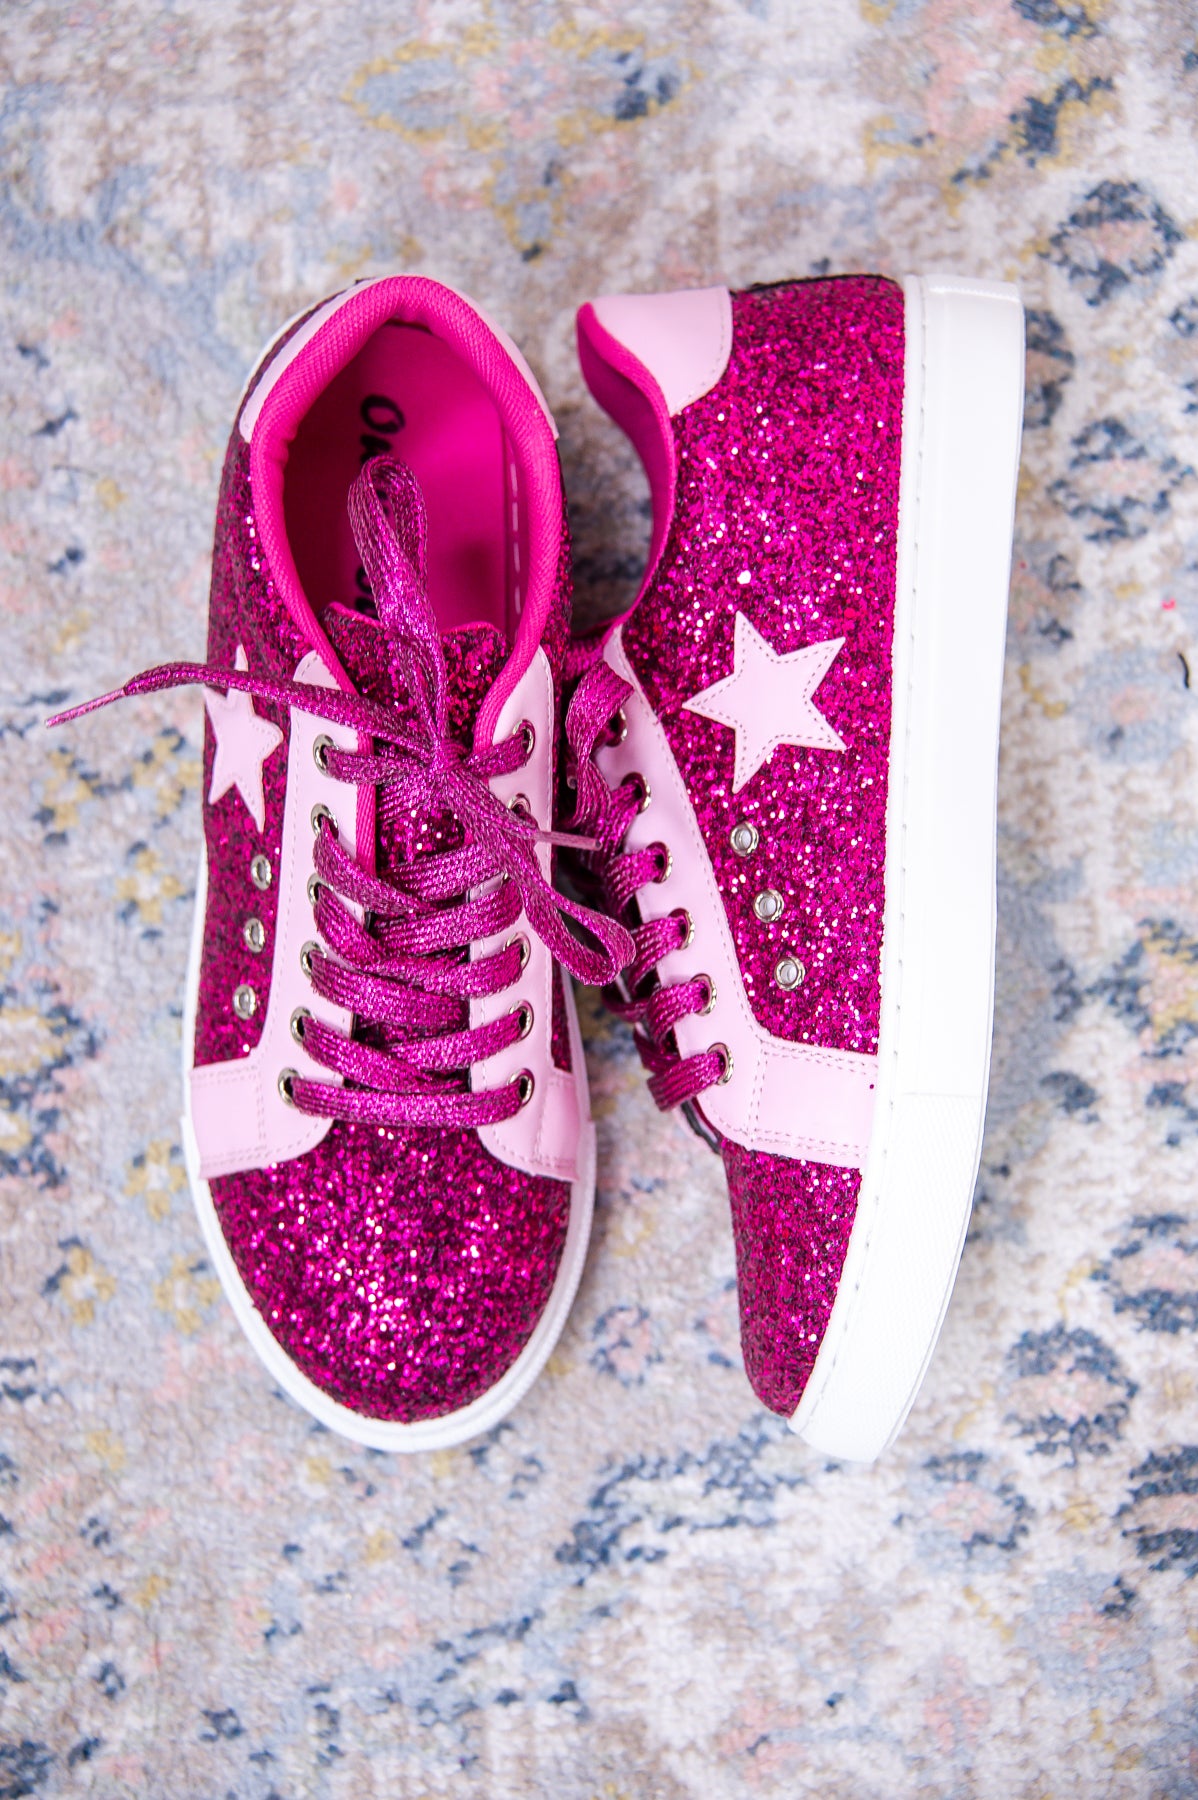 Airwalk, Shoes, Brand New Pink Sparkly Sneakers